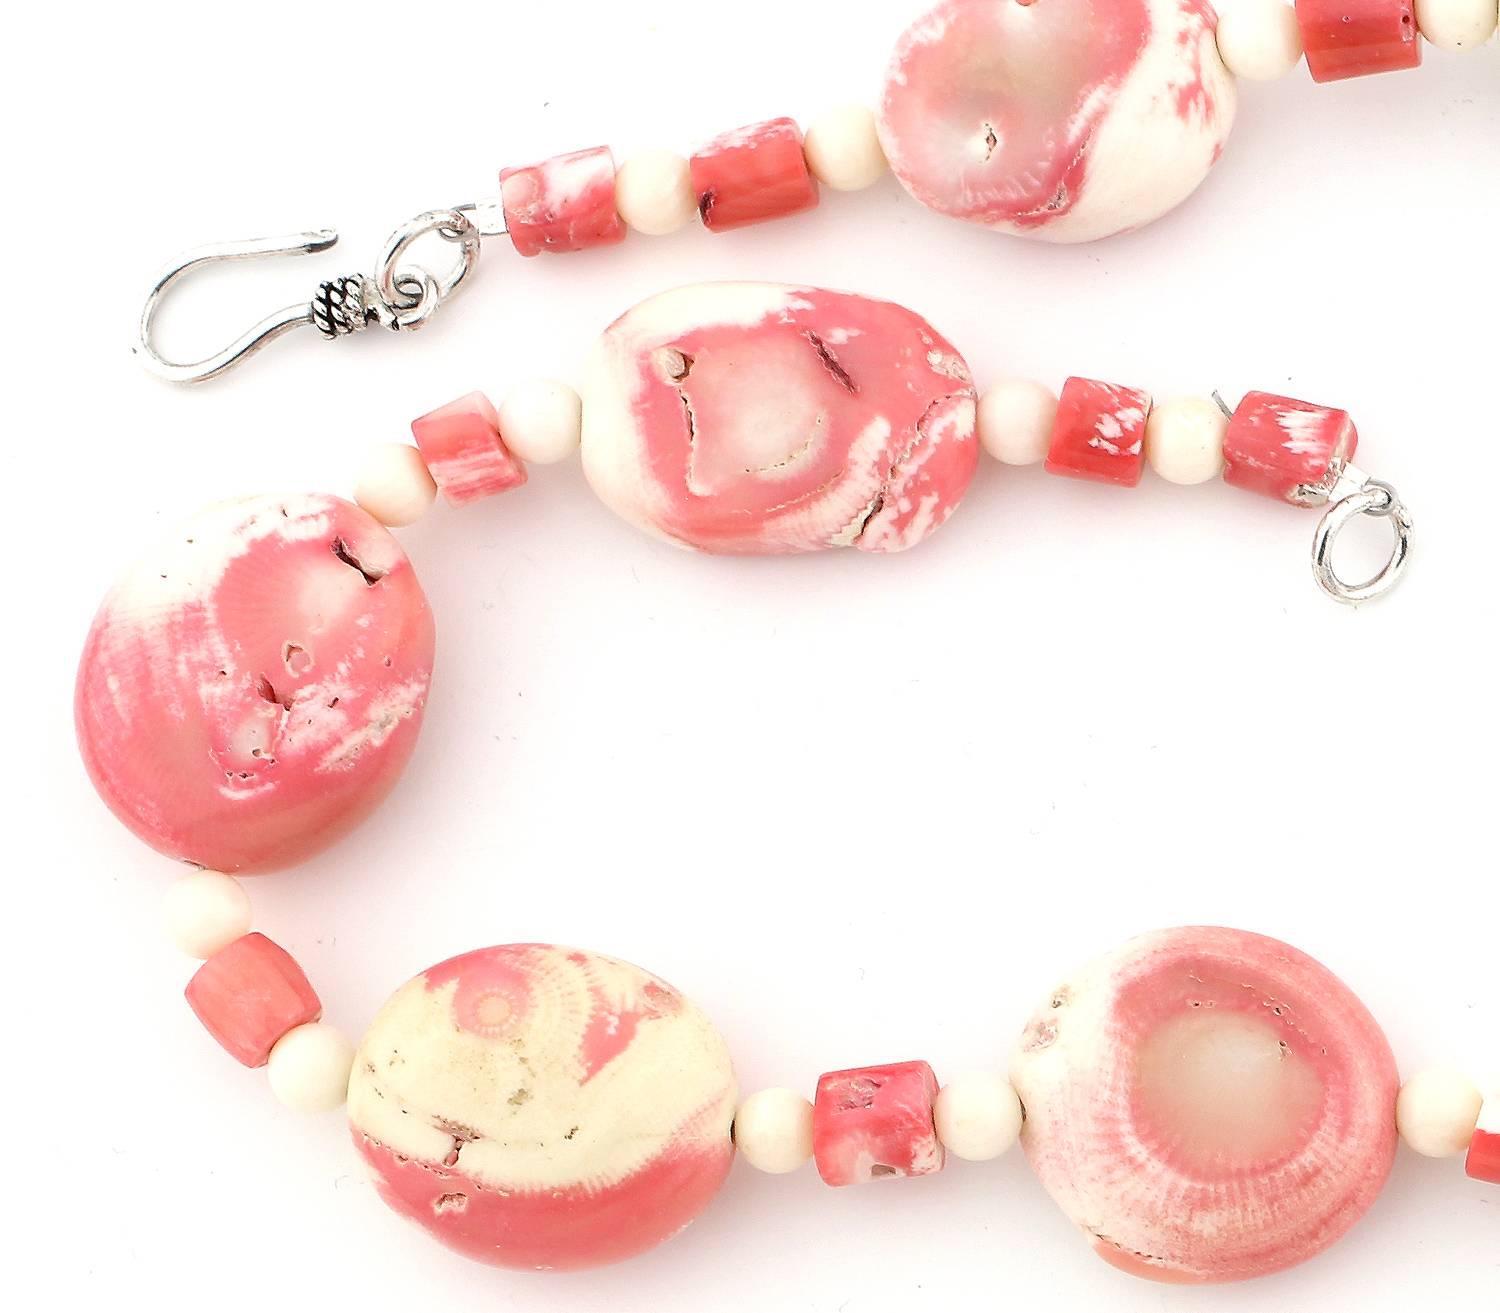 Slightly graduated pink and white crude polished bamboo Coral enhanced with smaller white and pink and white bamboo Coral with orangy pinky bamboo Coral pendant.
Size: This handmade pendant is 3 inches and largest Oval Coral is 29 mm x 23 mm,